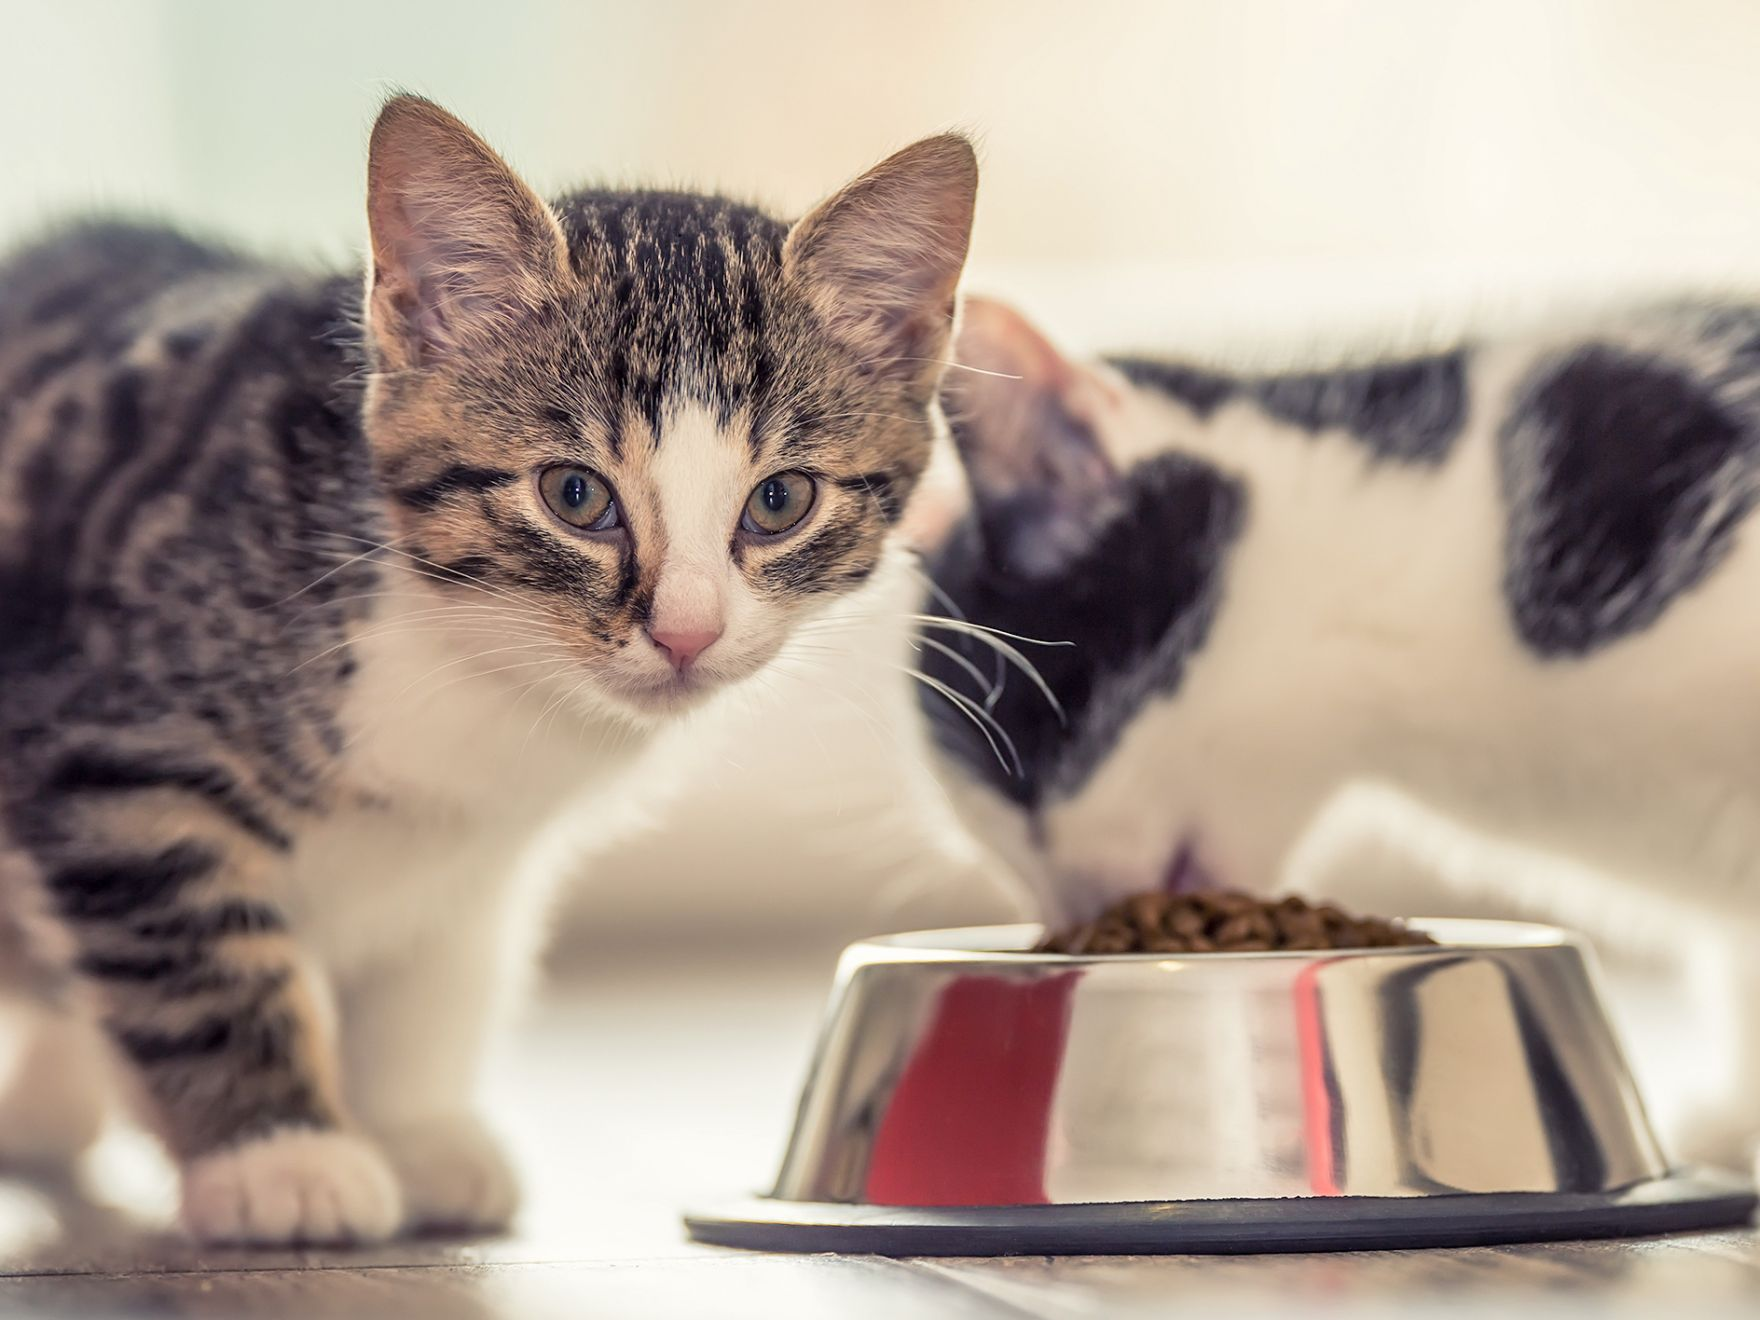 Two kittens standing indoors, one eating from a silver bowl